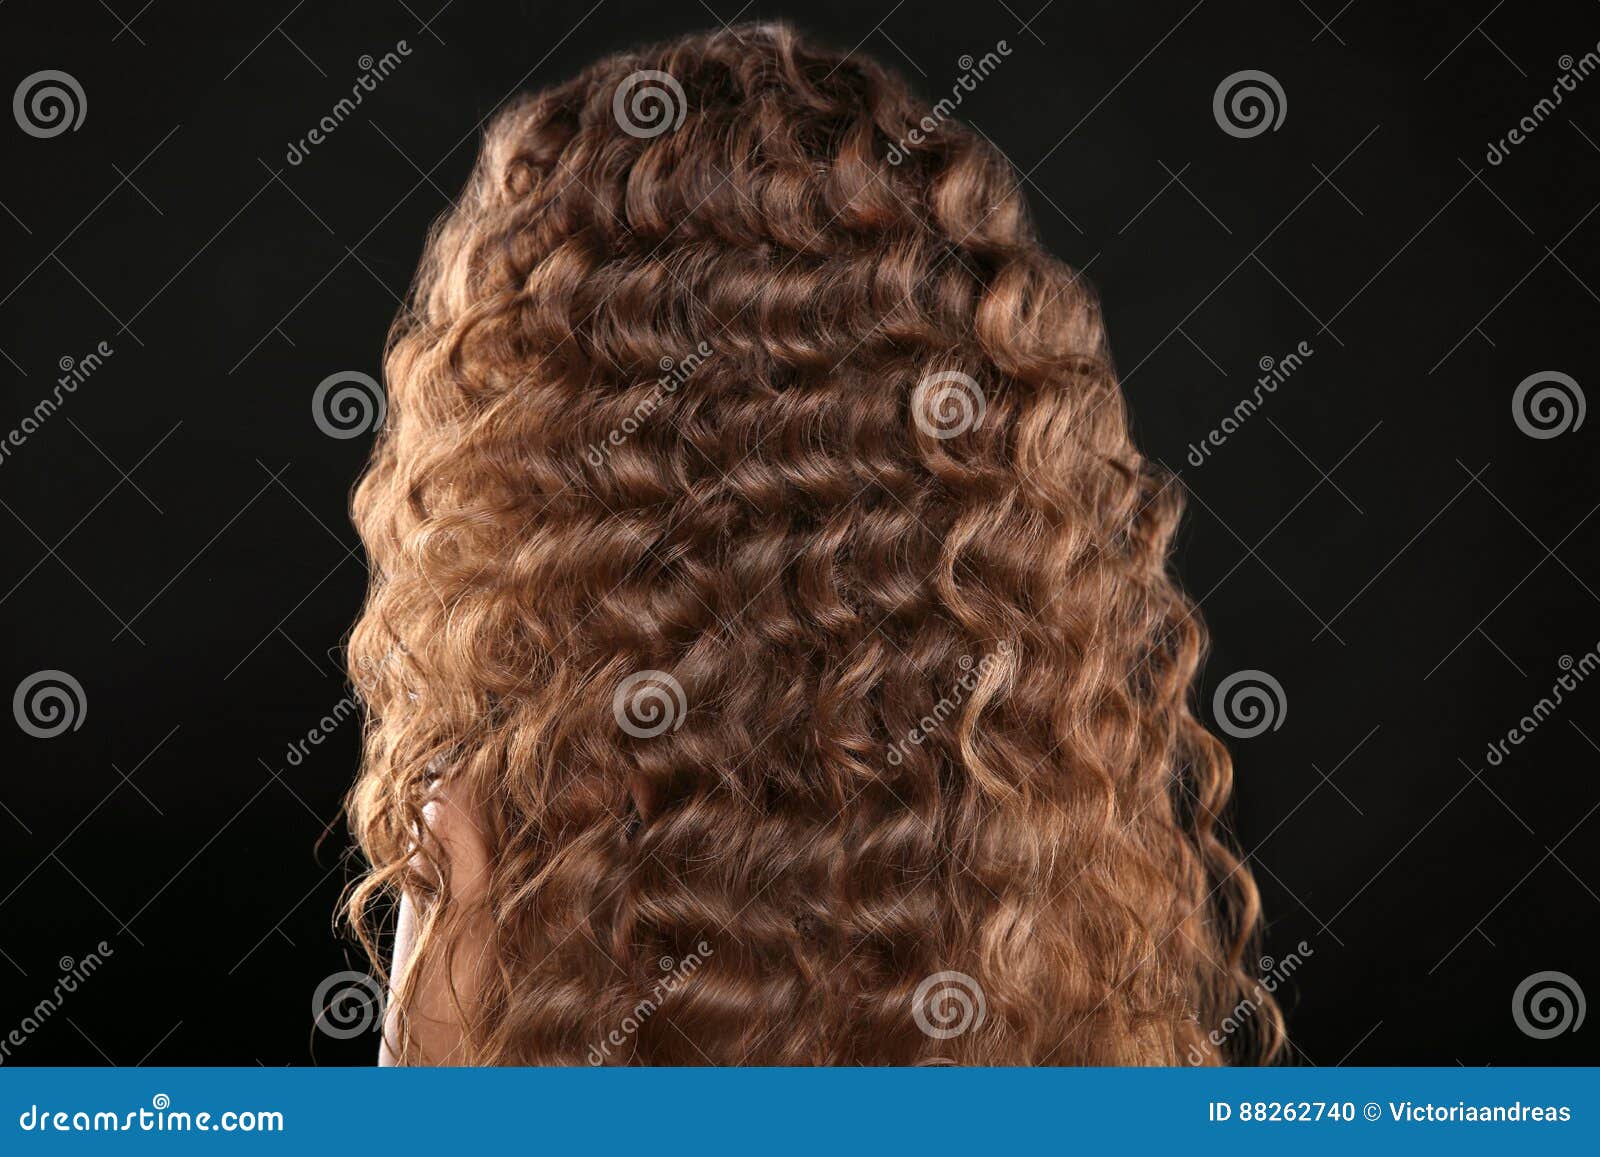 Healthy Hair Curly Long Hairstyle Back View Of Brown Hairs Ha Stock